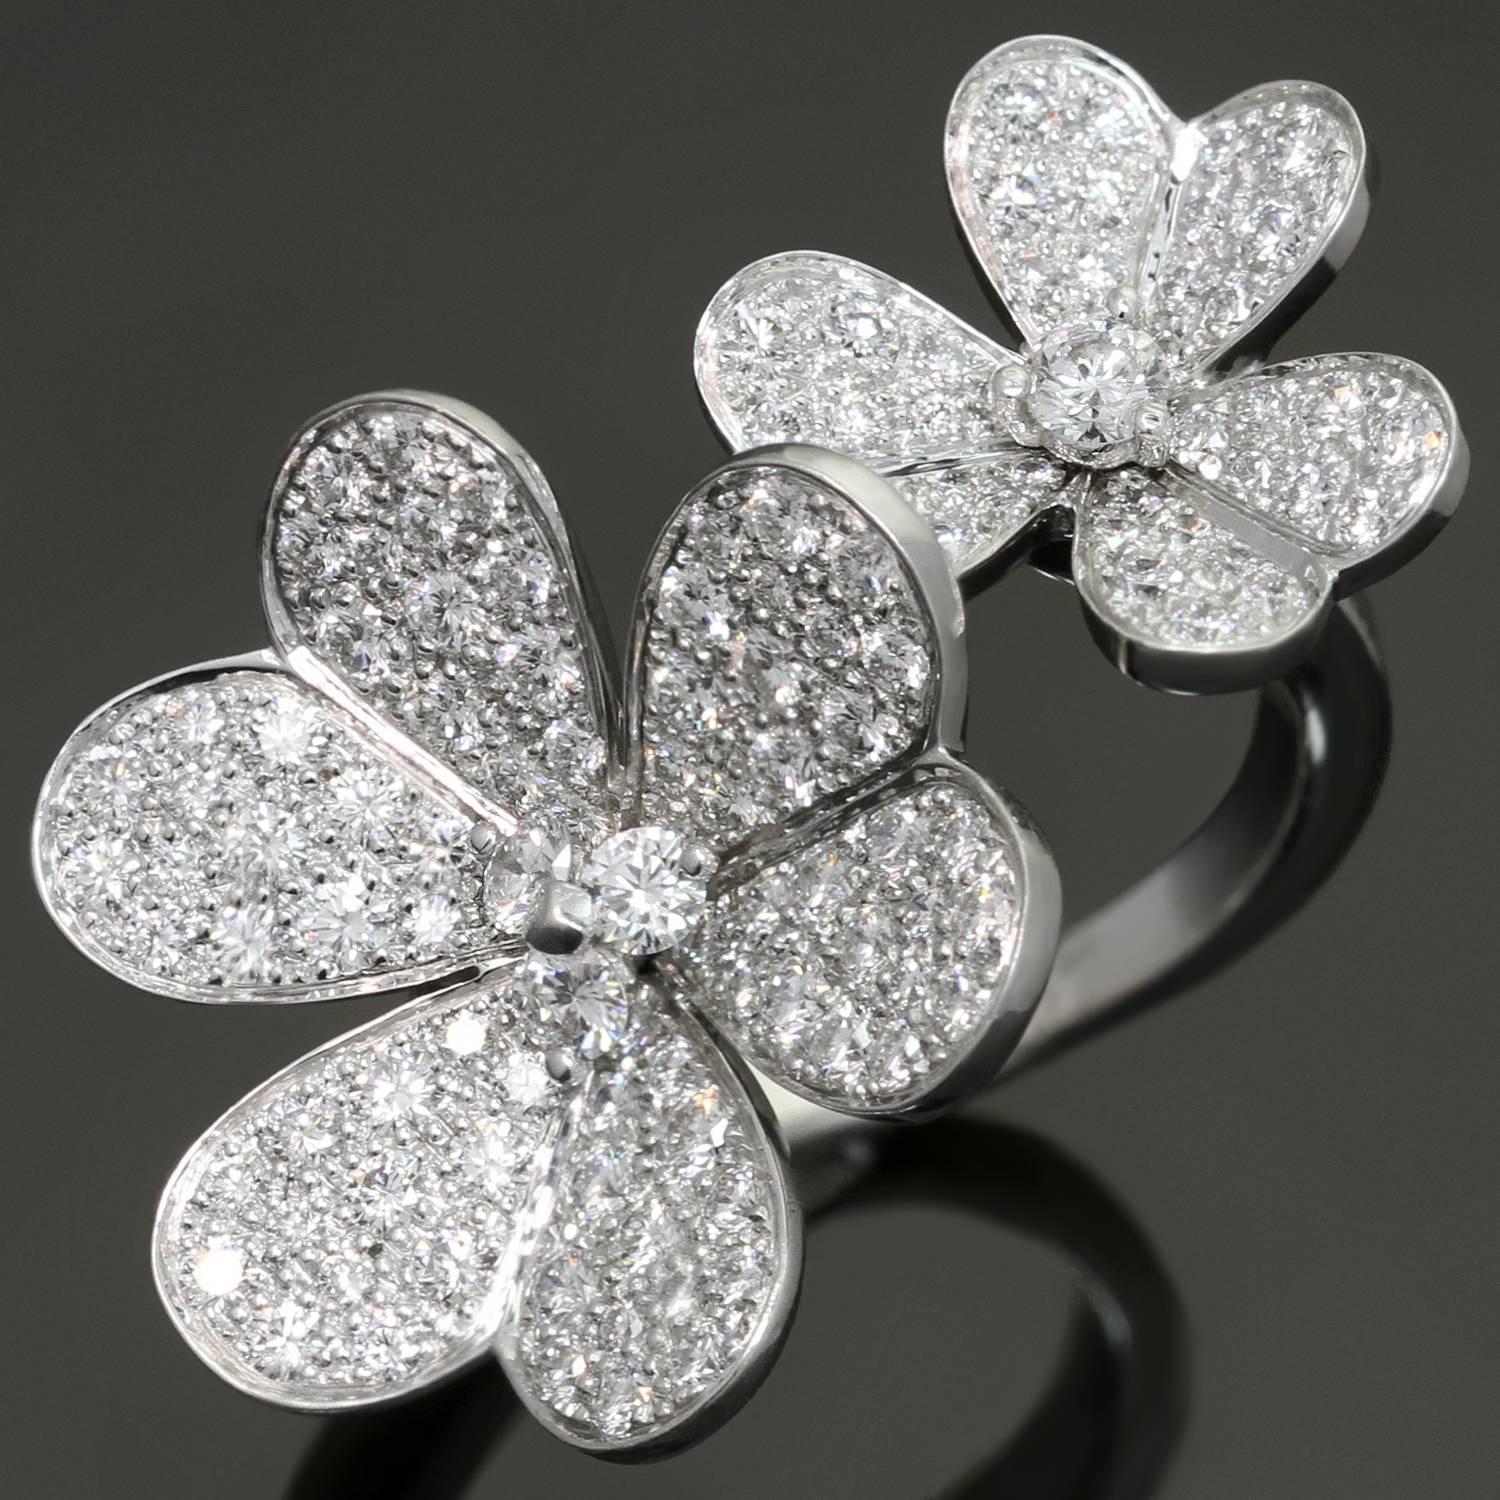 This fabulous between-the-finger ring from the iconic Frivole collection features a sparkling two flower design crafted in 18k white gold and set with about 112 brilliant-cut round diamonds of an estimated 2.10 carats. The ring size is adjustable